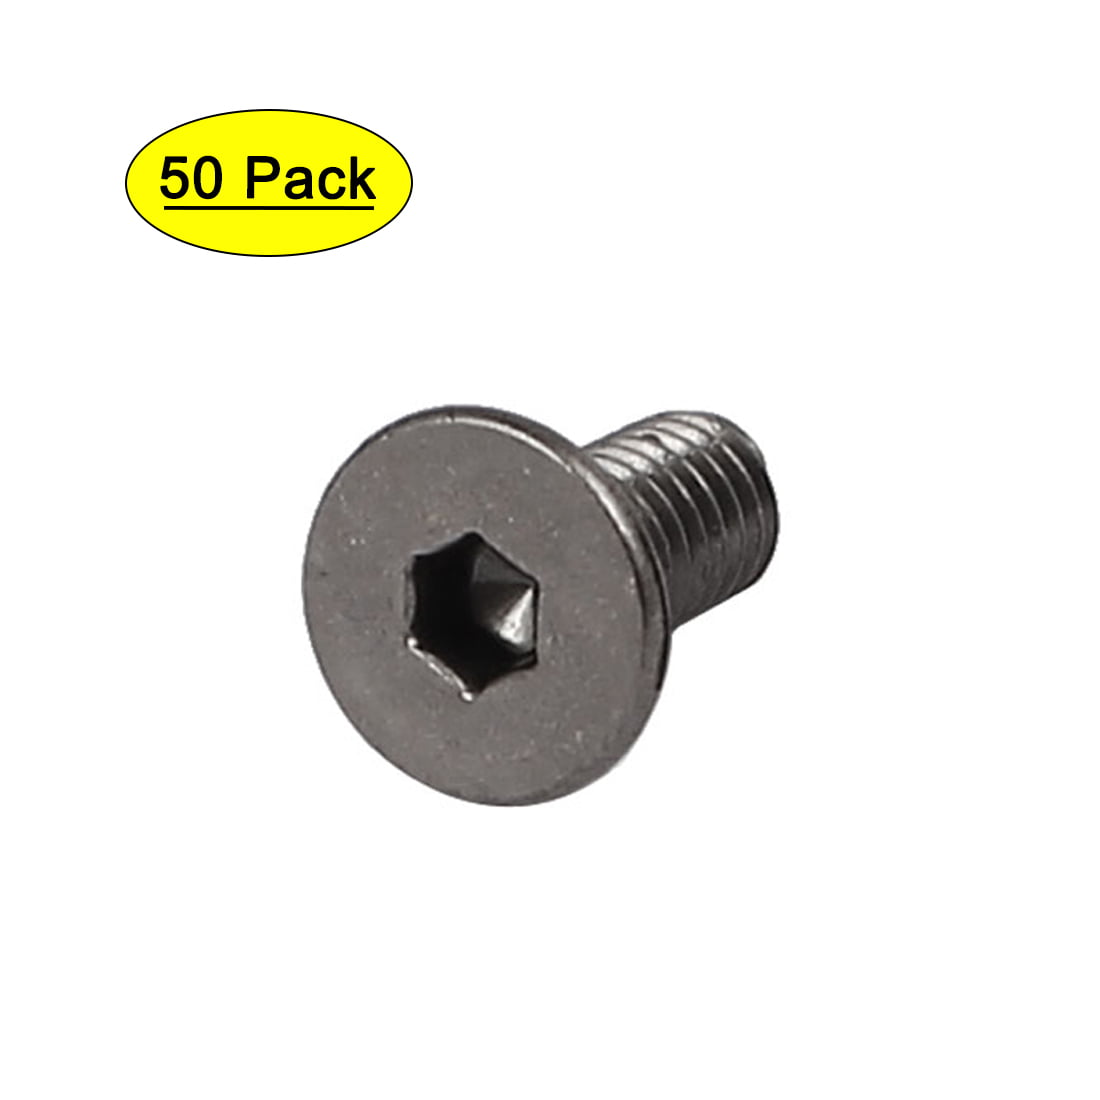 FABORY M51030.060.0012 SHCS,Button,A2 SS,M6-1.00x12mm,PK50 